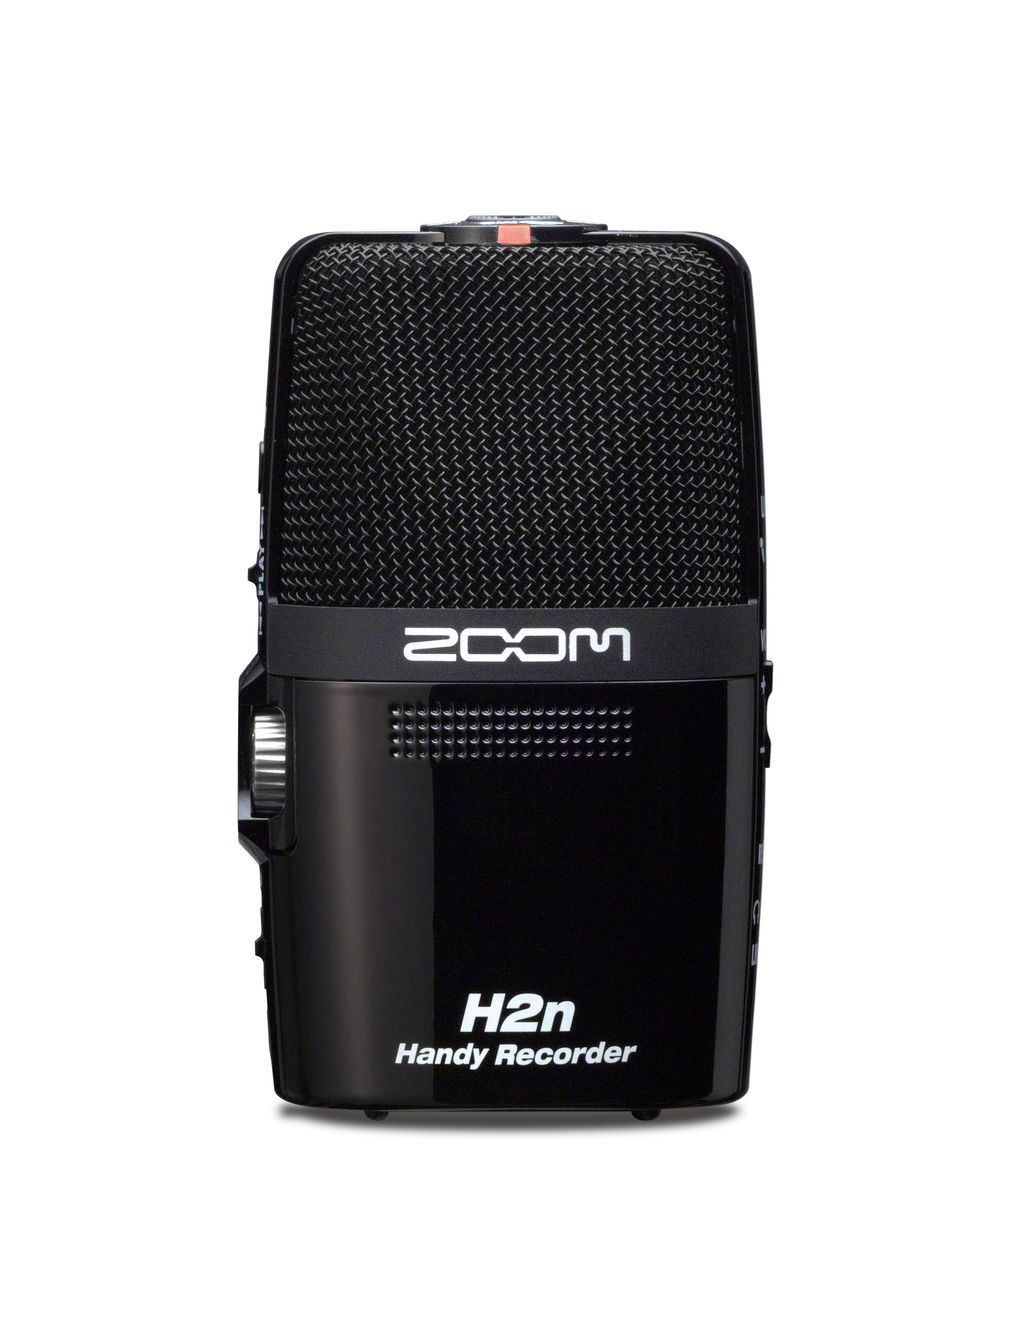 Up to 25% Discount on selected Zoom Audio Recorders & Accessories* (H1 / H2n / H4n / H6 / etc)